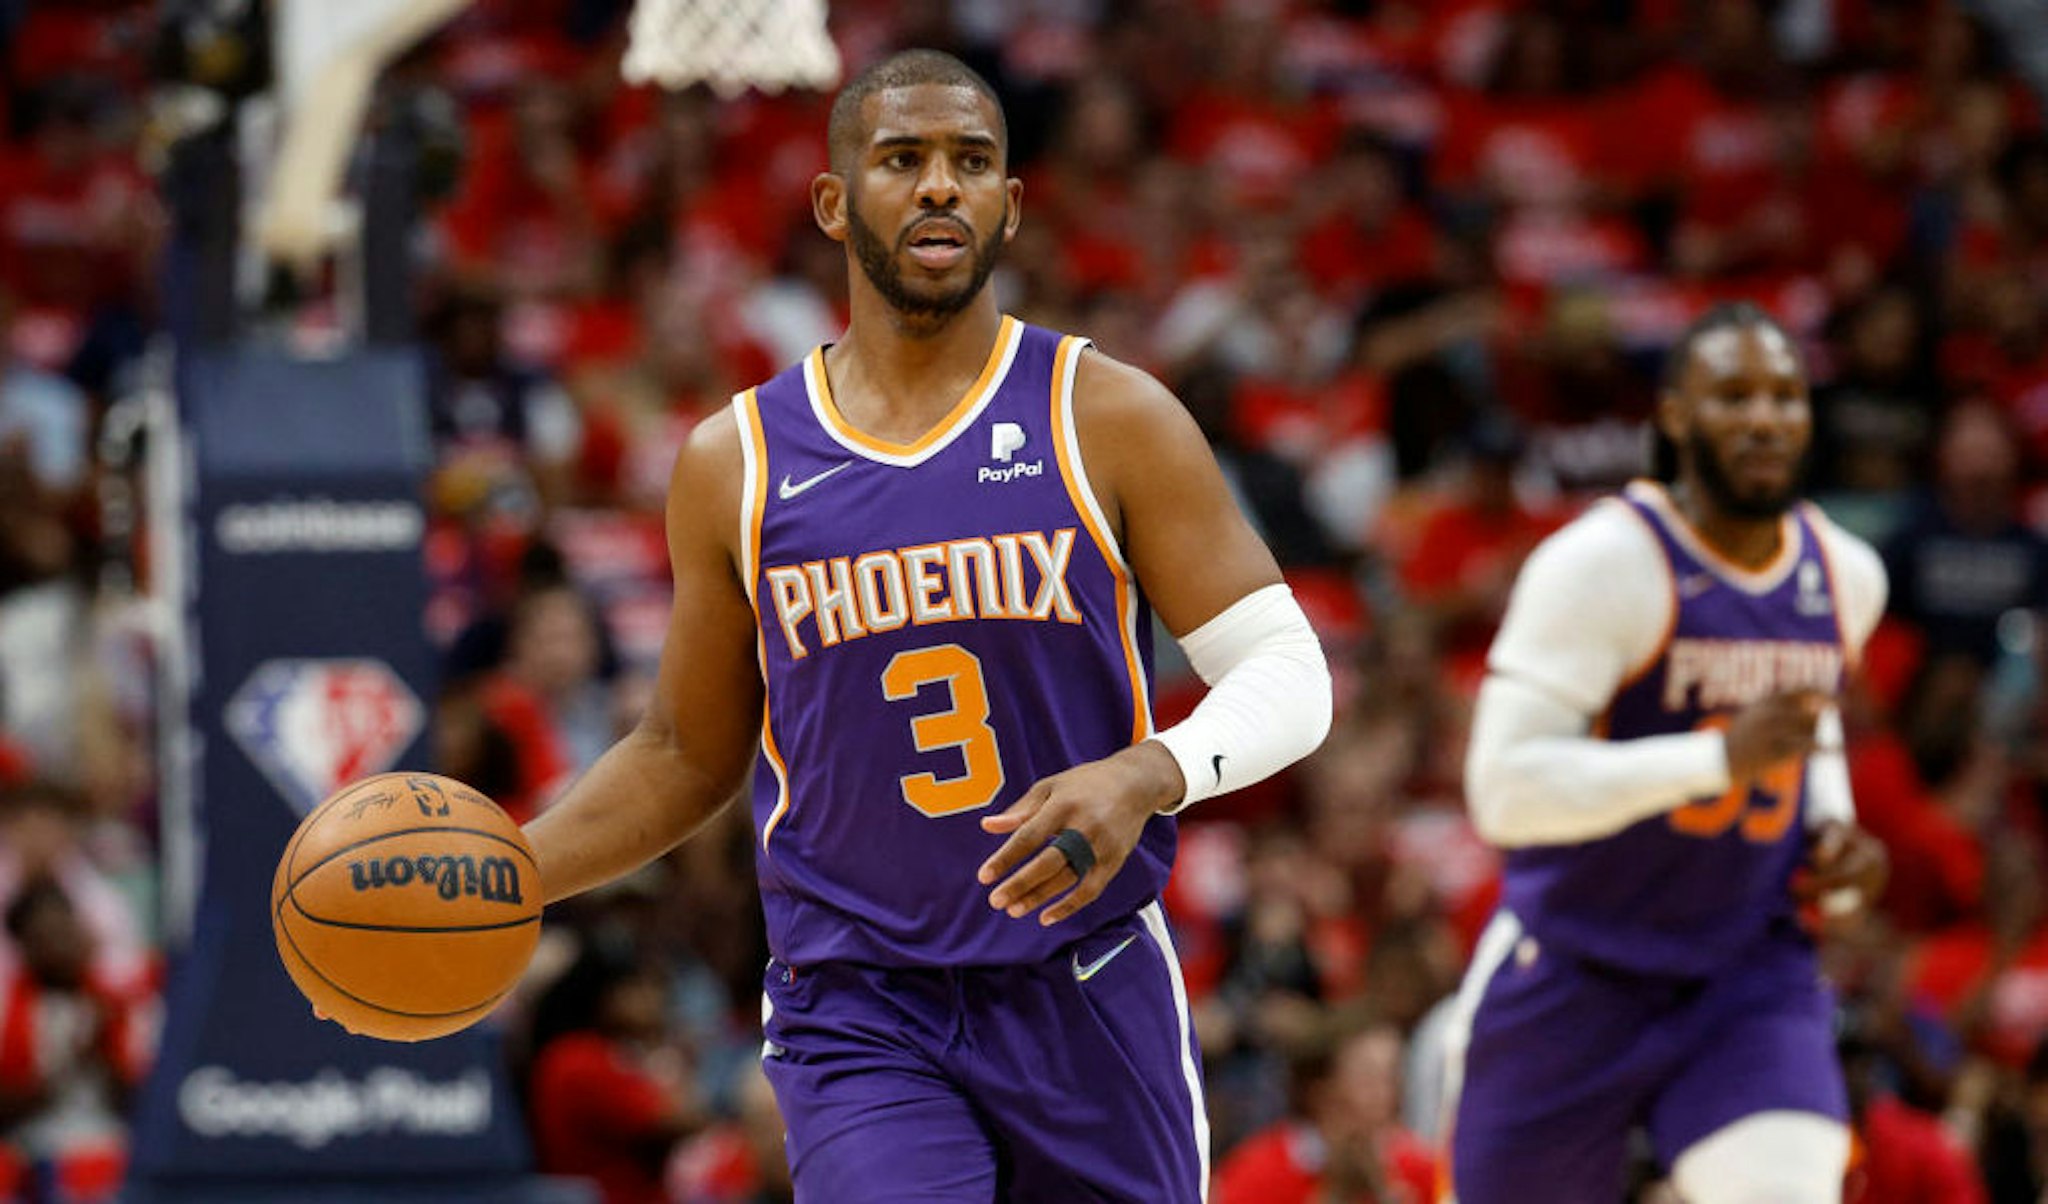 NEW ORLEANS, LOUISIANA - APRIL 28: Chris Paul #3 of the Phoenix Suns drives the ball up the court against the New Orleans Pelicans at Smoothie King Center on April 28, 2022 in New Orleans, Louisiana. NOTE TO USER: User expressly acknowledges and agrees that, by downloading and or using this Photograph, user is consenting to the terms and conditions of the Getty Images License Agreement. (Photo by Chris Graythen/Getty Images)